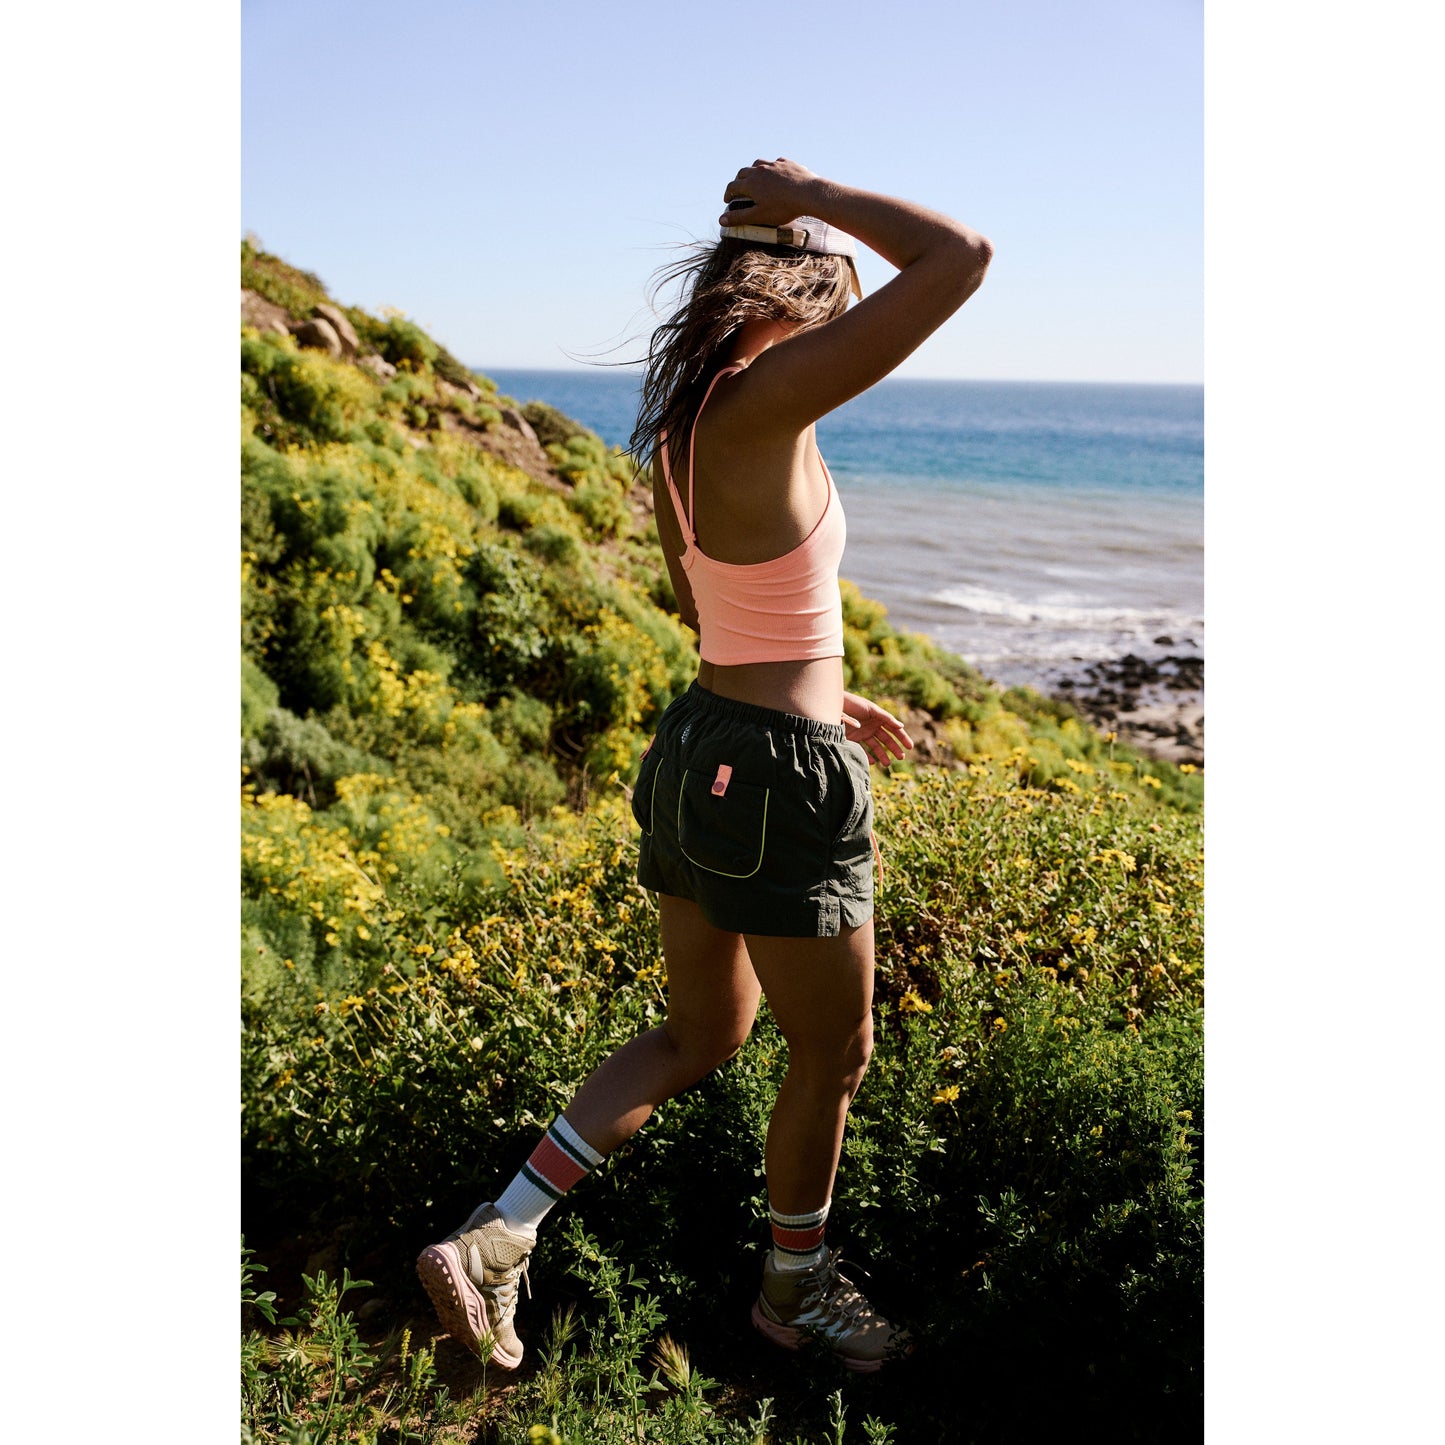 Woman jogging through coastal trail among wildflowers, sea in the background, tying her hair up in the Free People Movement Outskirts Skort in Olive Combo.